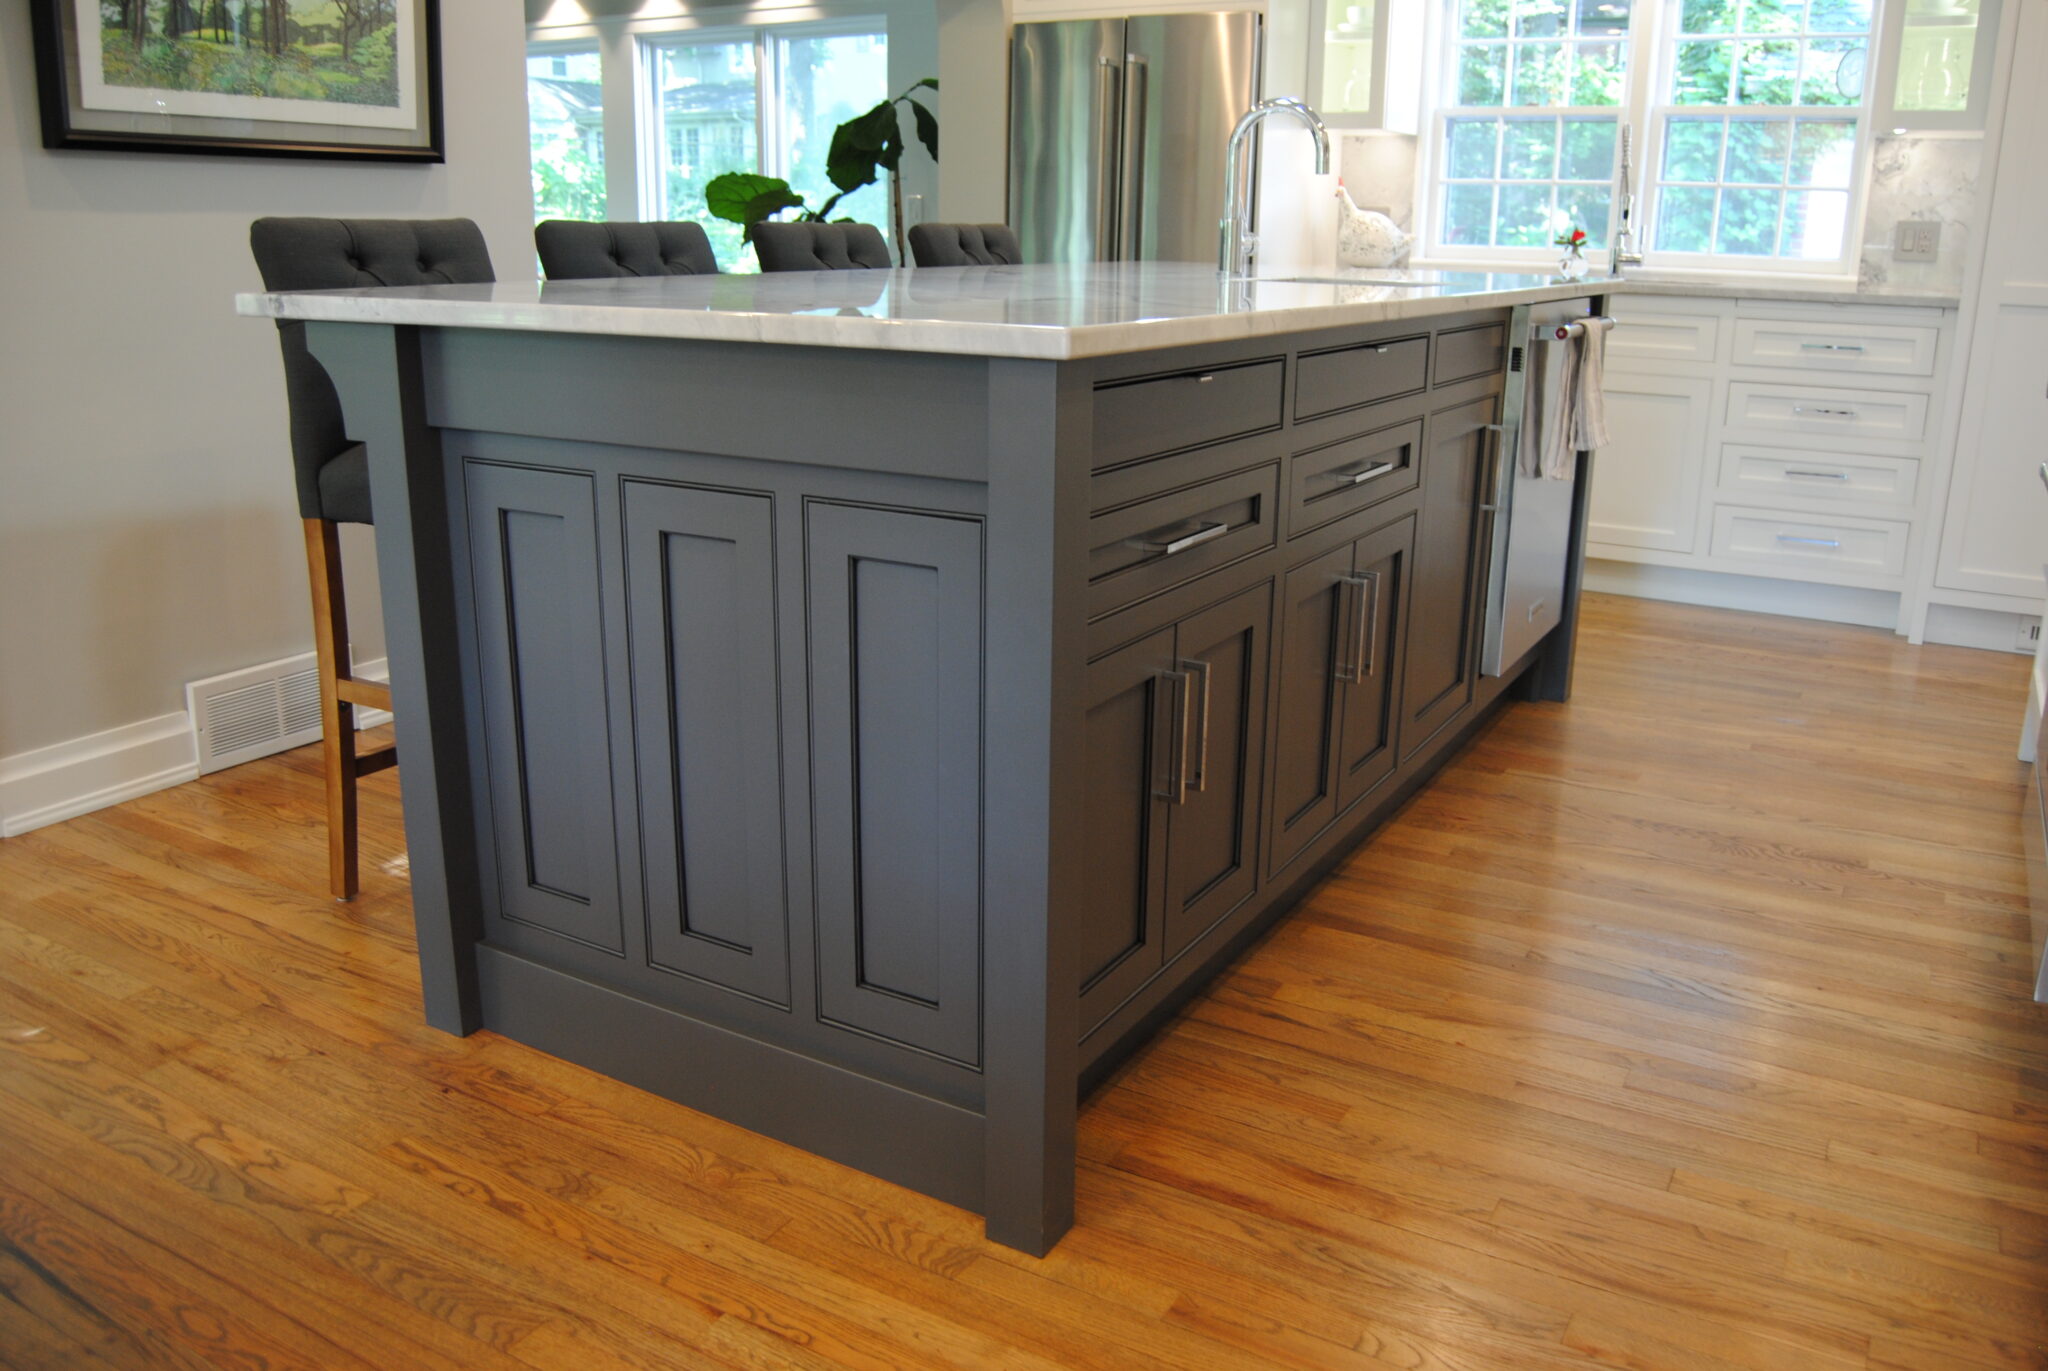 Kitchen center island with liberty ship hatch cover top